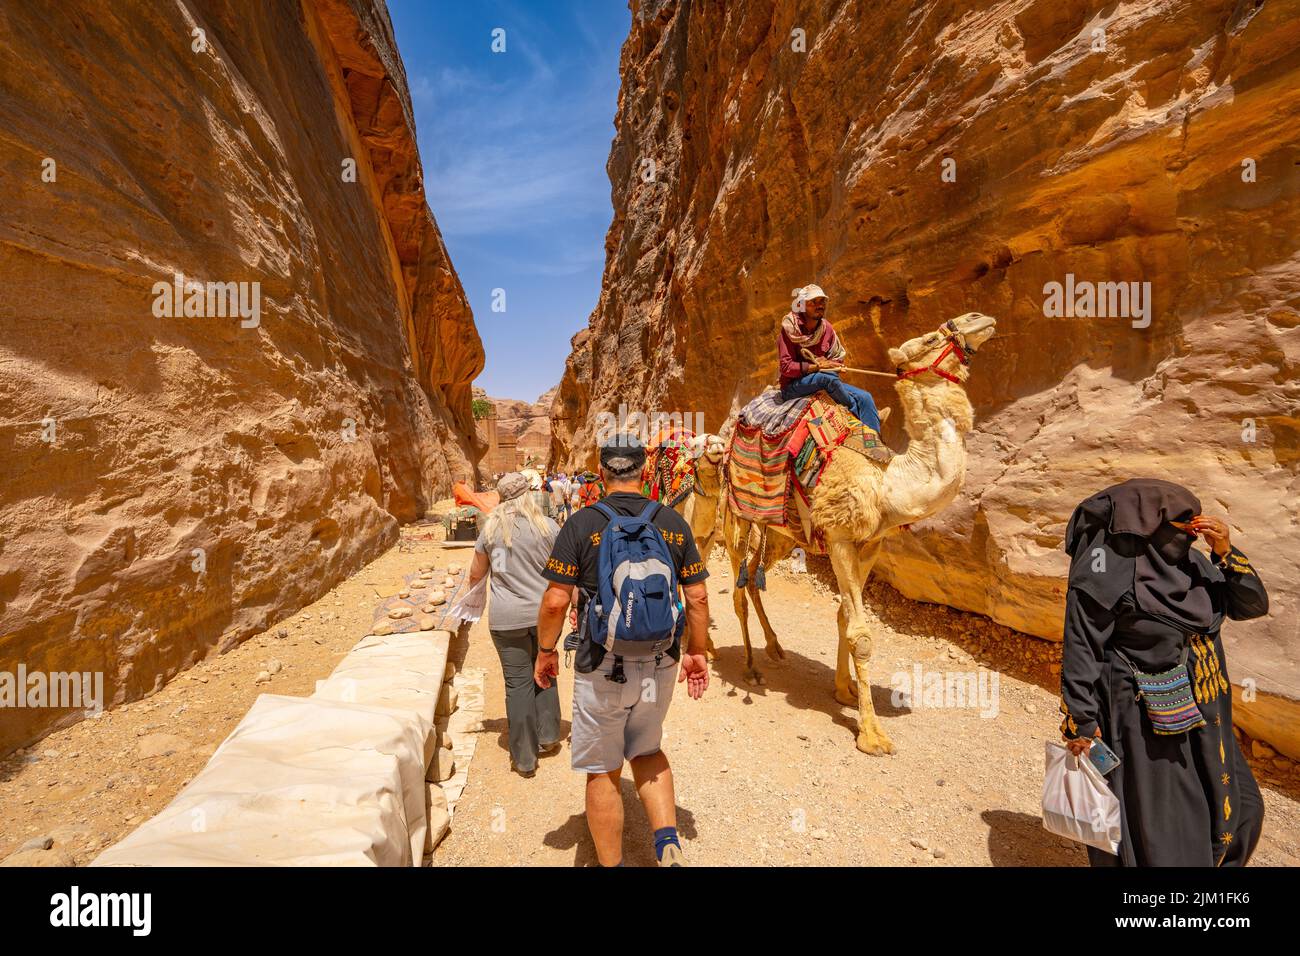 Camels and tourists in the canyon of Petra Jordan. Stock Photo